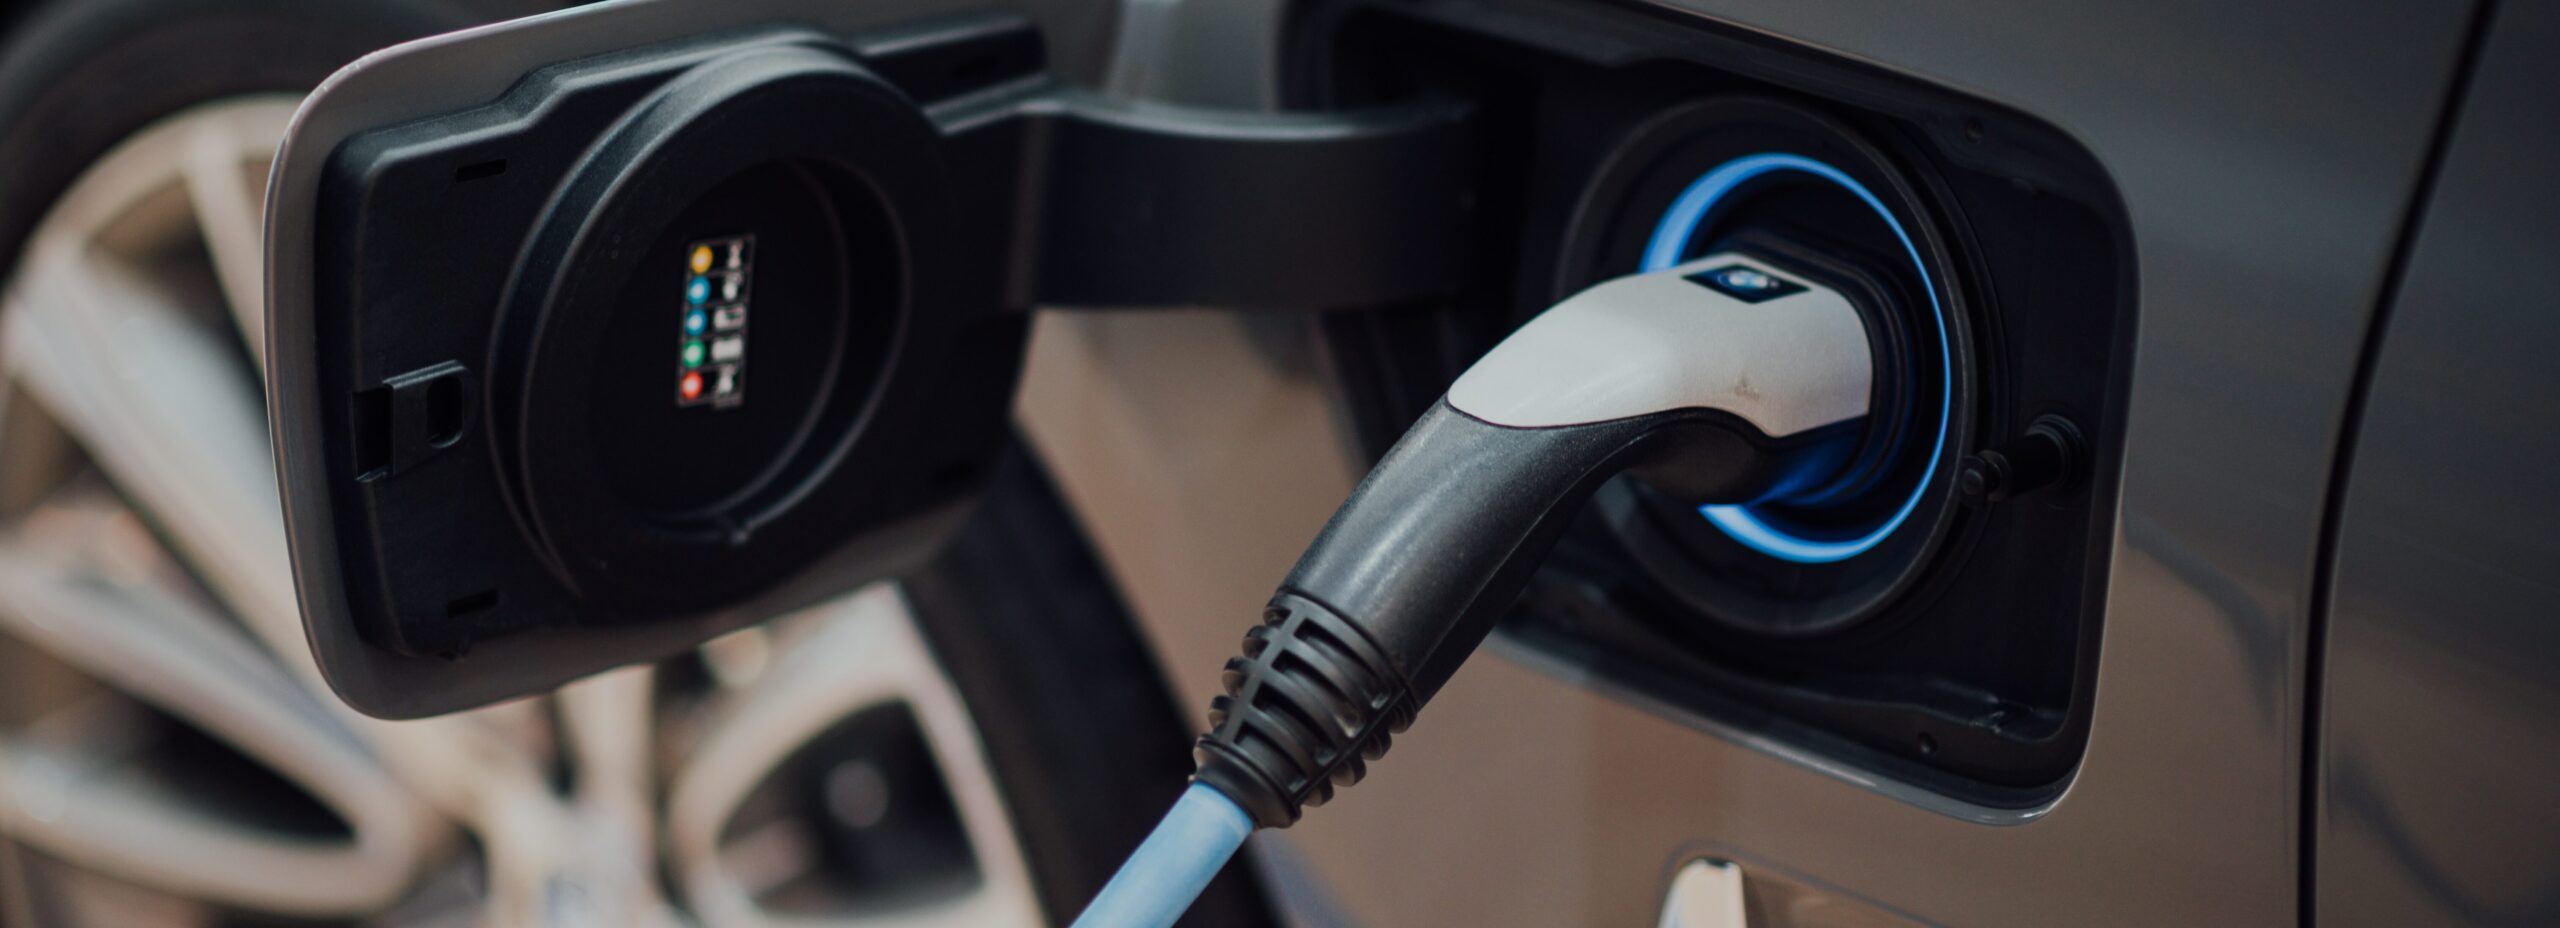 Different Types of Electric Vehicle (EV) Chargers